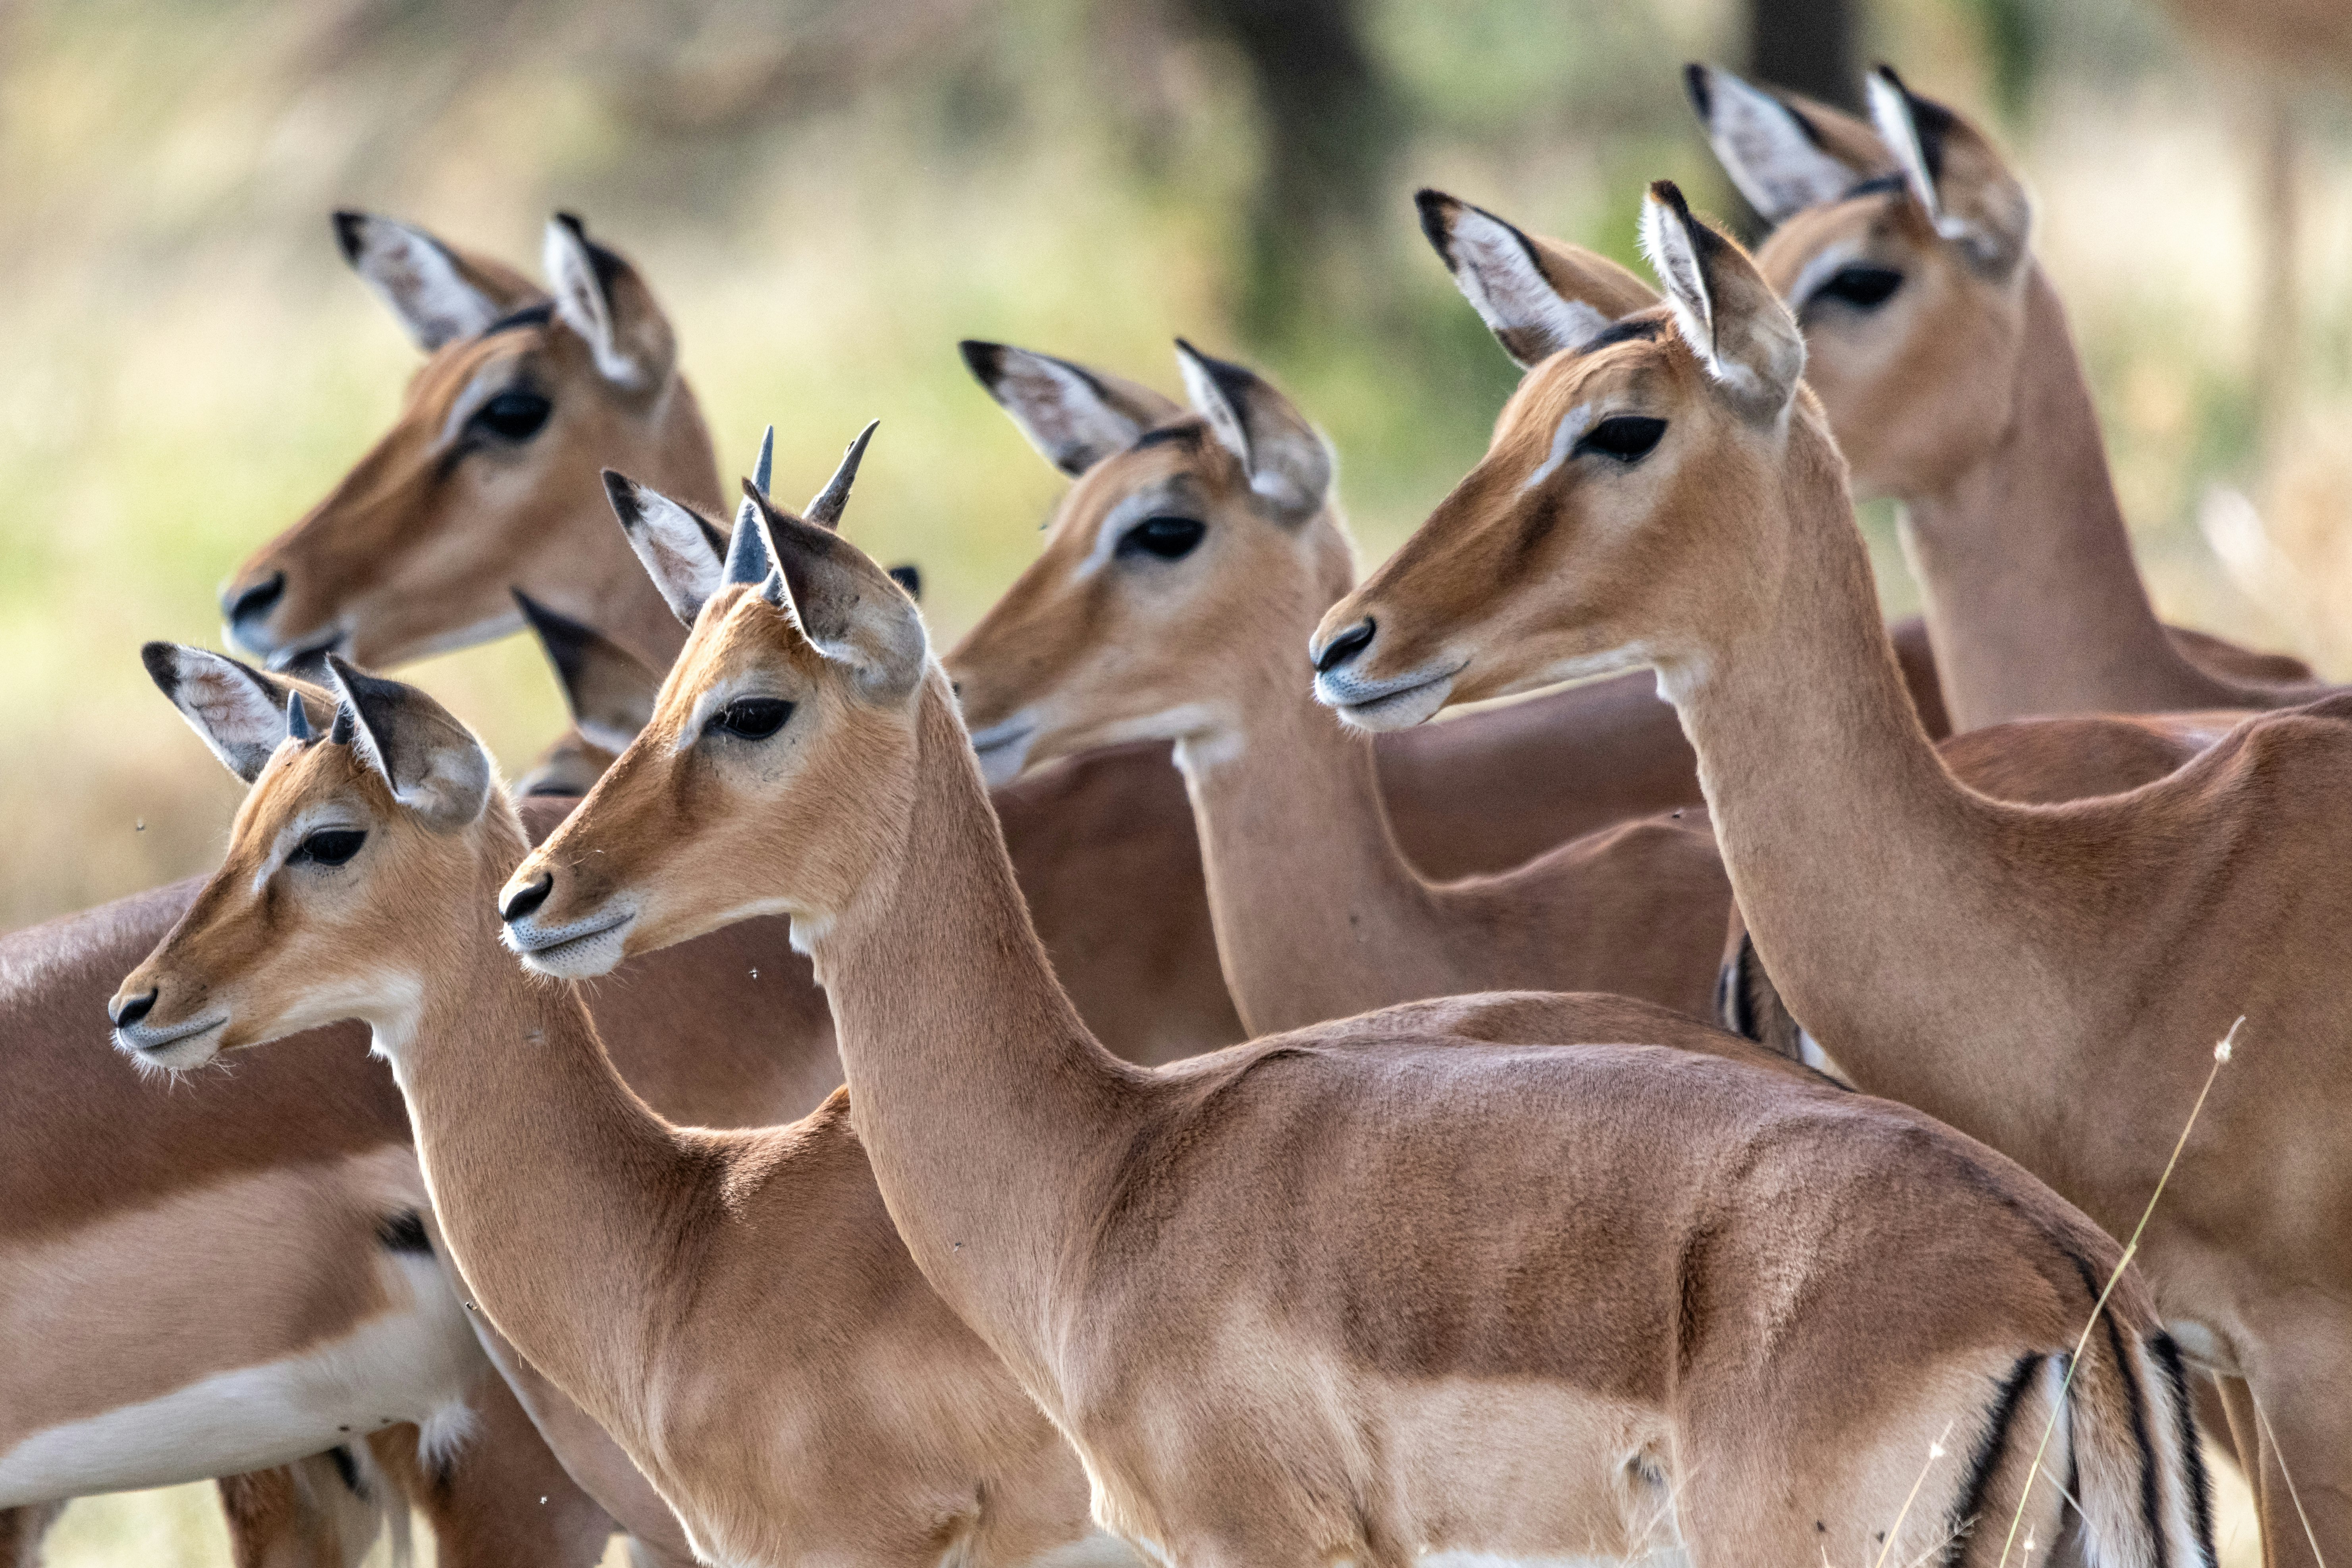 Africa's impala is an antelope, completely different from Wyoming's pronghorn.